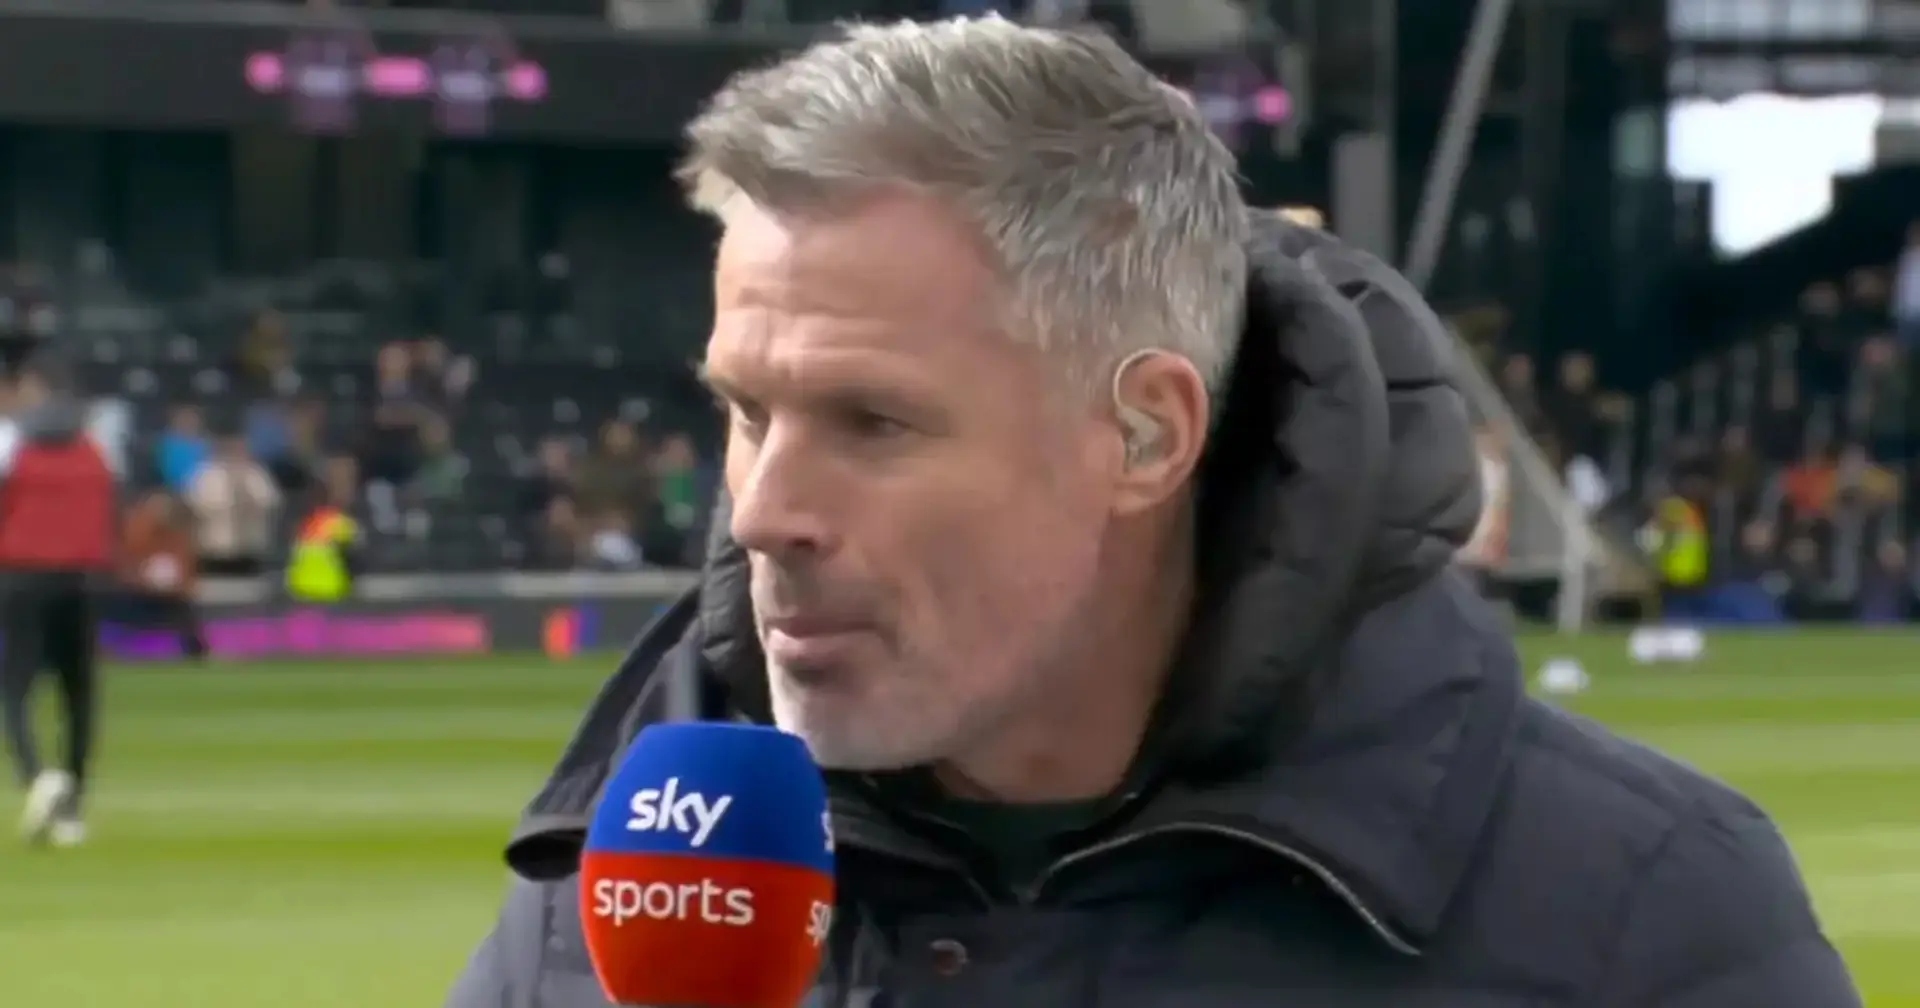 'Great position to be in': Carragher on Liverpool chances in Premier League after Fulham win